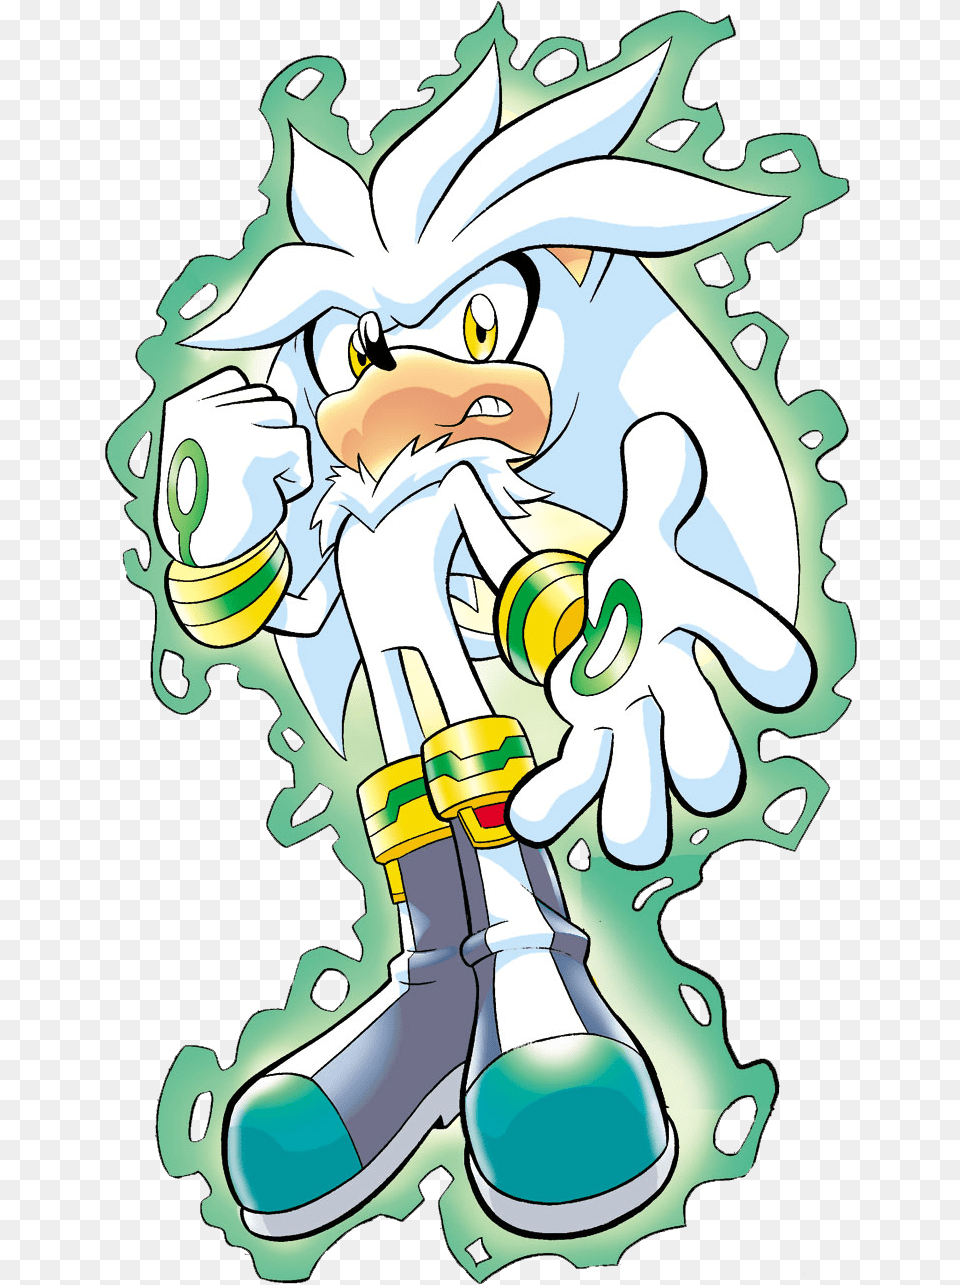 Silver The Hedgehog Archie Comic Silver The Hedgehog, Book, Comics, Publication, Baby Png